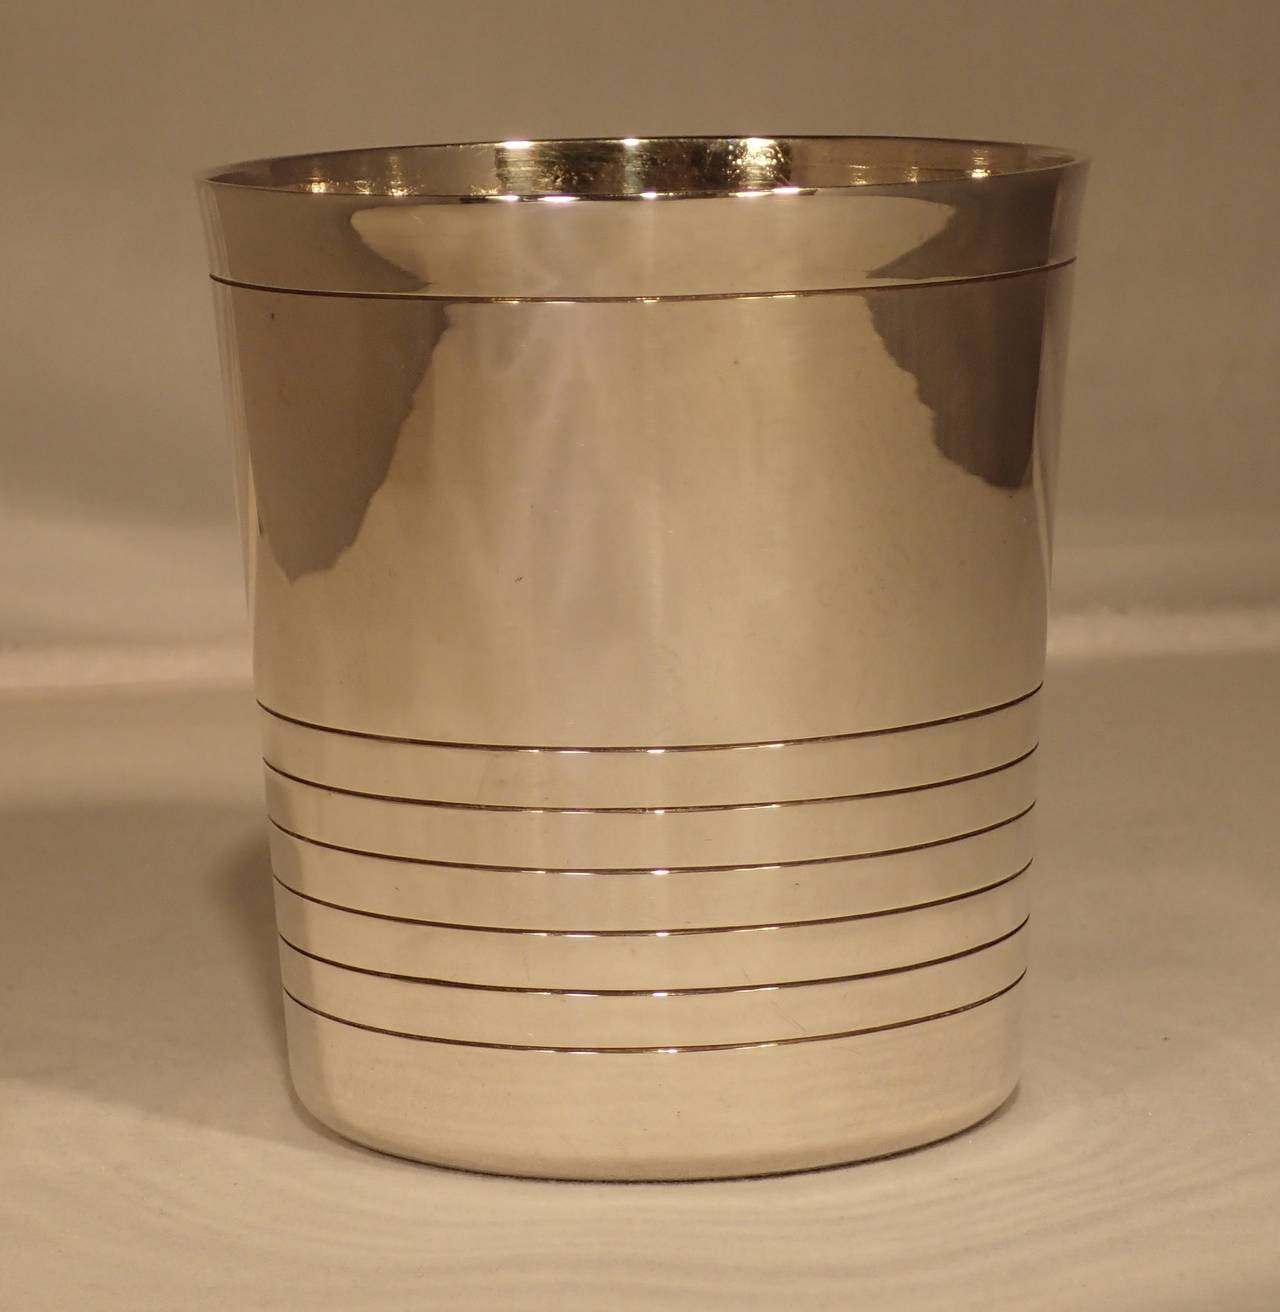 A beautifully simple and solid silver cocktail tumbler by William Spratling. Formed as a slightly tapered conical cup etched with modern line motif around top lip and bottom half of body
Stamp: marked with the William Spratling hallmark of WS-BB.